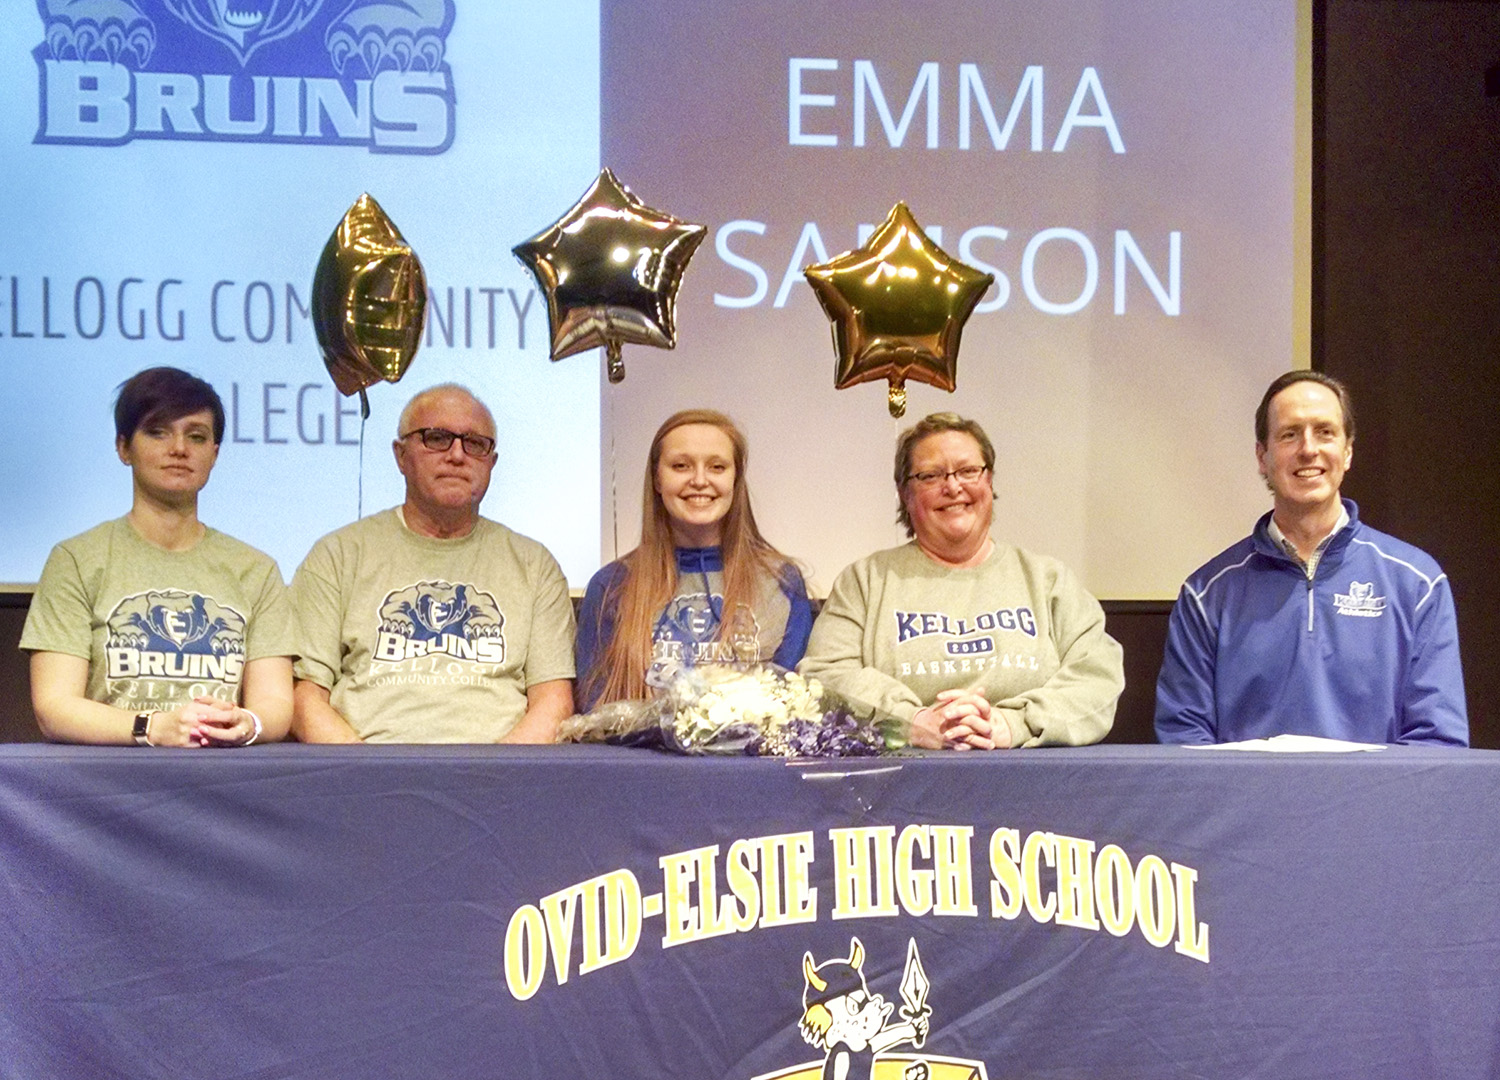 Pictured, from left to right, are Grace Samson (sister), Robert Samson (father), KCC women's basketball signee Emma Samson, Beverly Samson (mother) and KCC’s Head Women’s Basketball Coach Dic Doumanian.